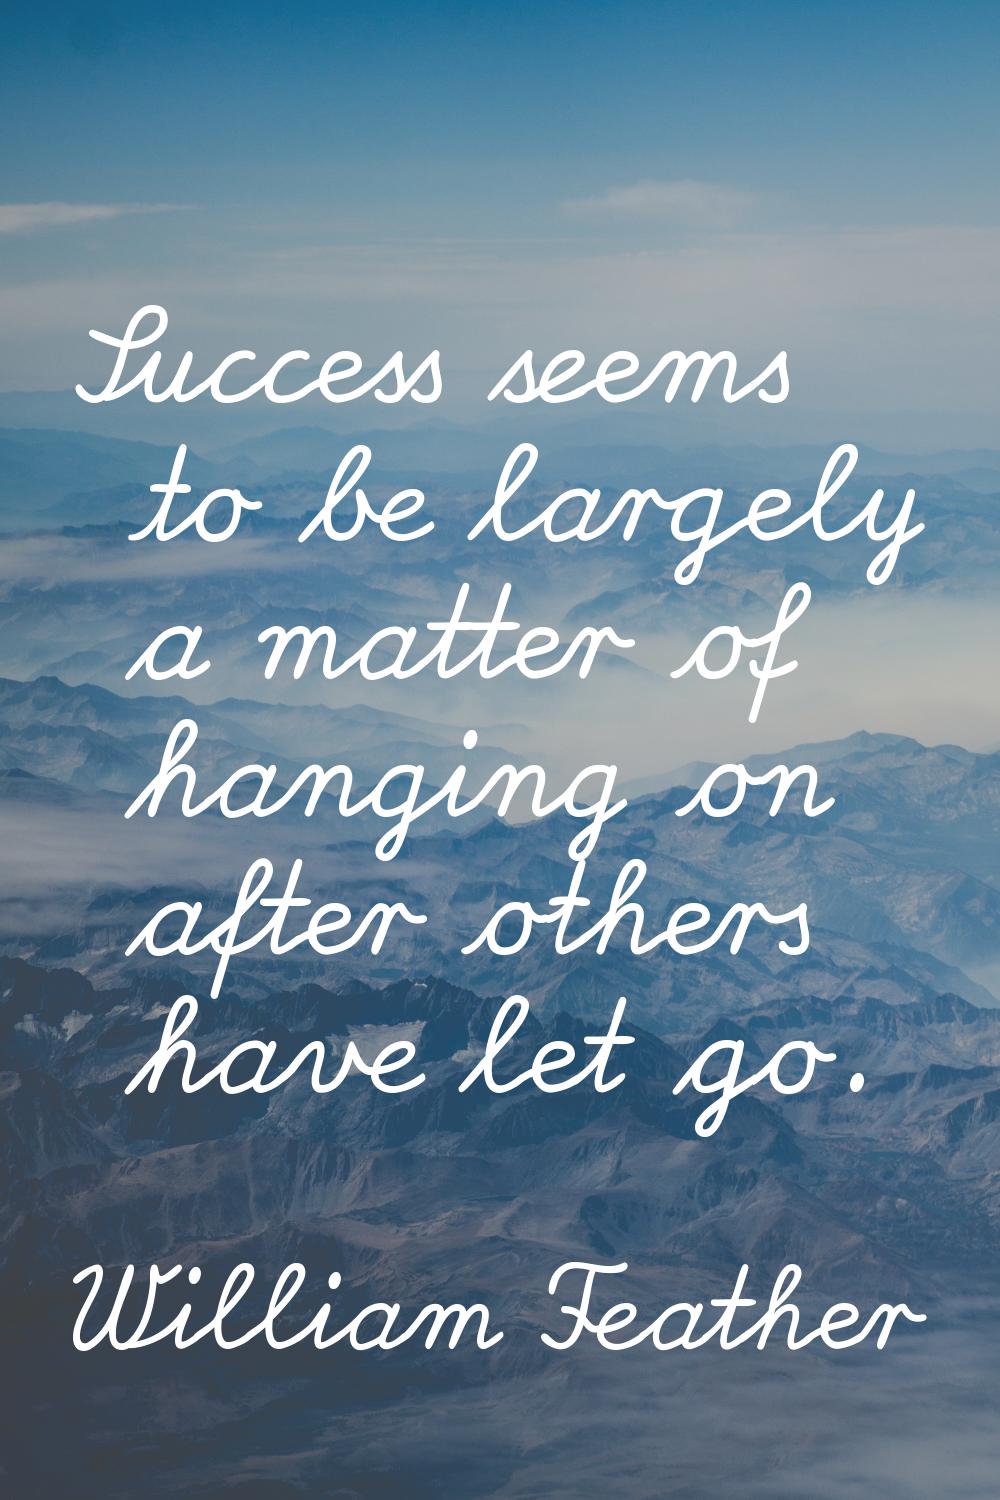 Success seems to be largely a matter of hanging on after others have let go.